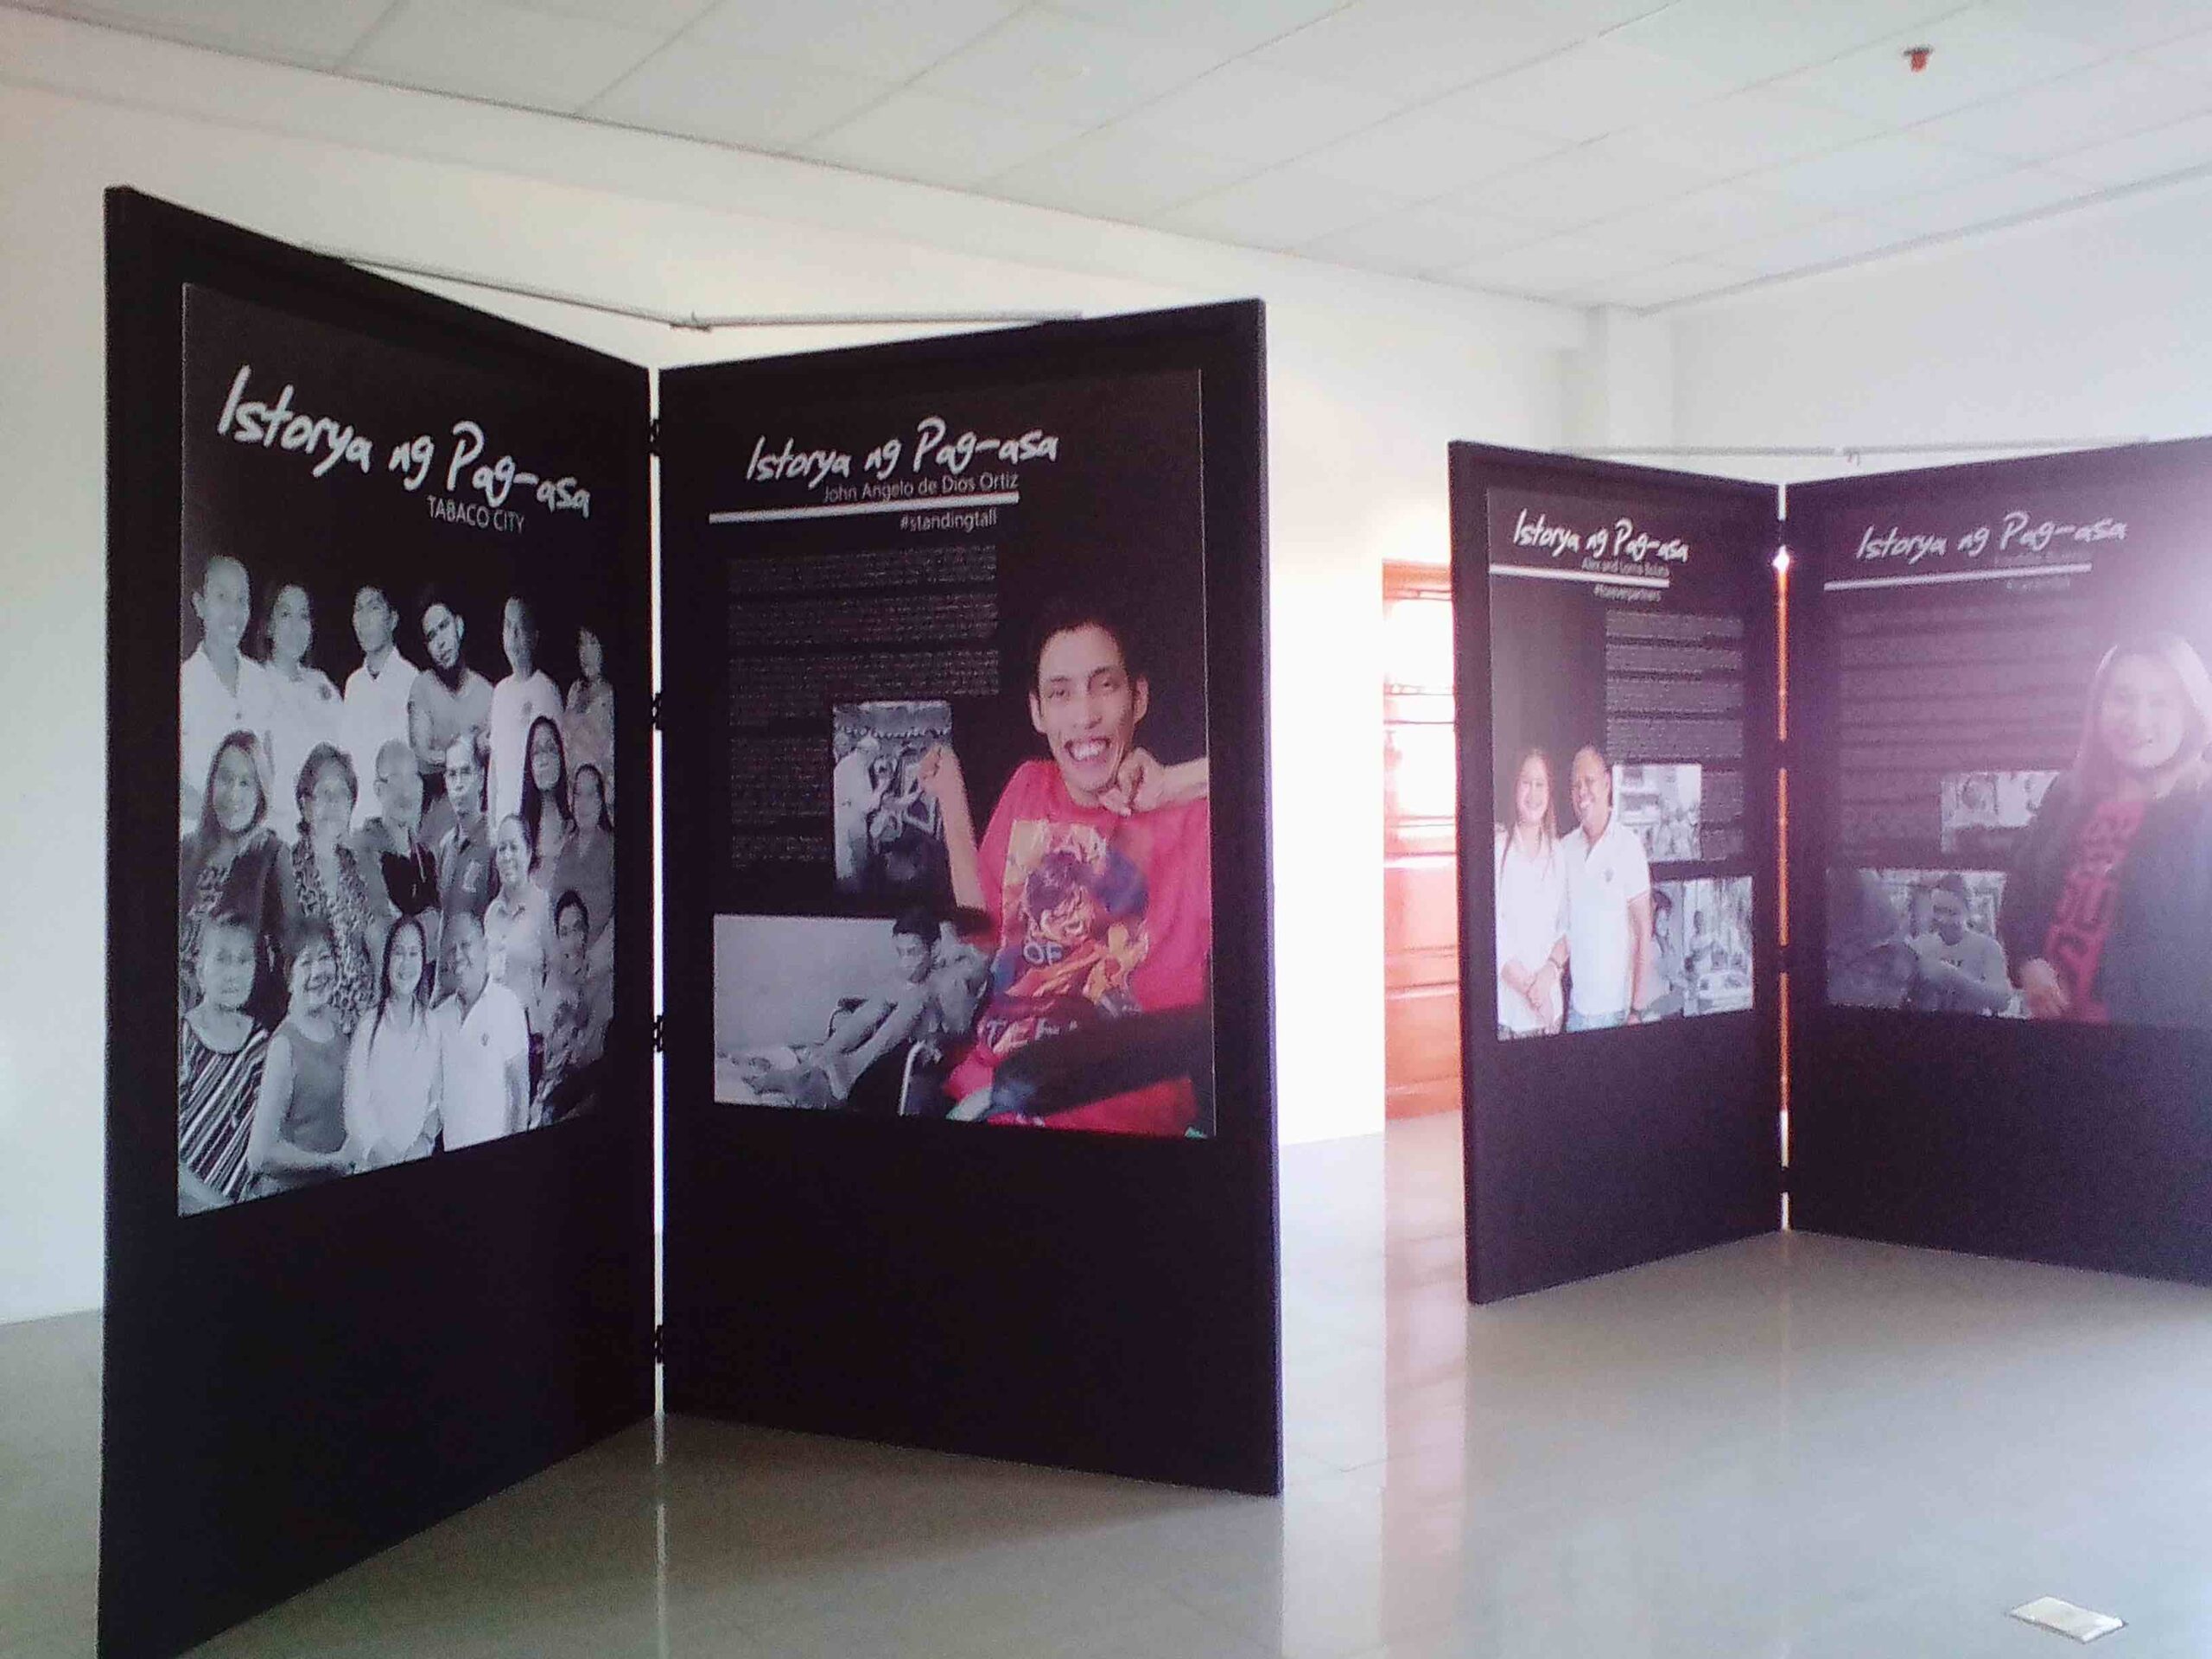 Traveling photo gallery tells stories of hope in Tabaco